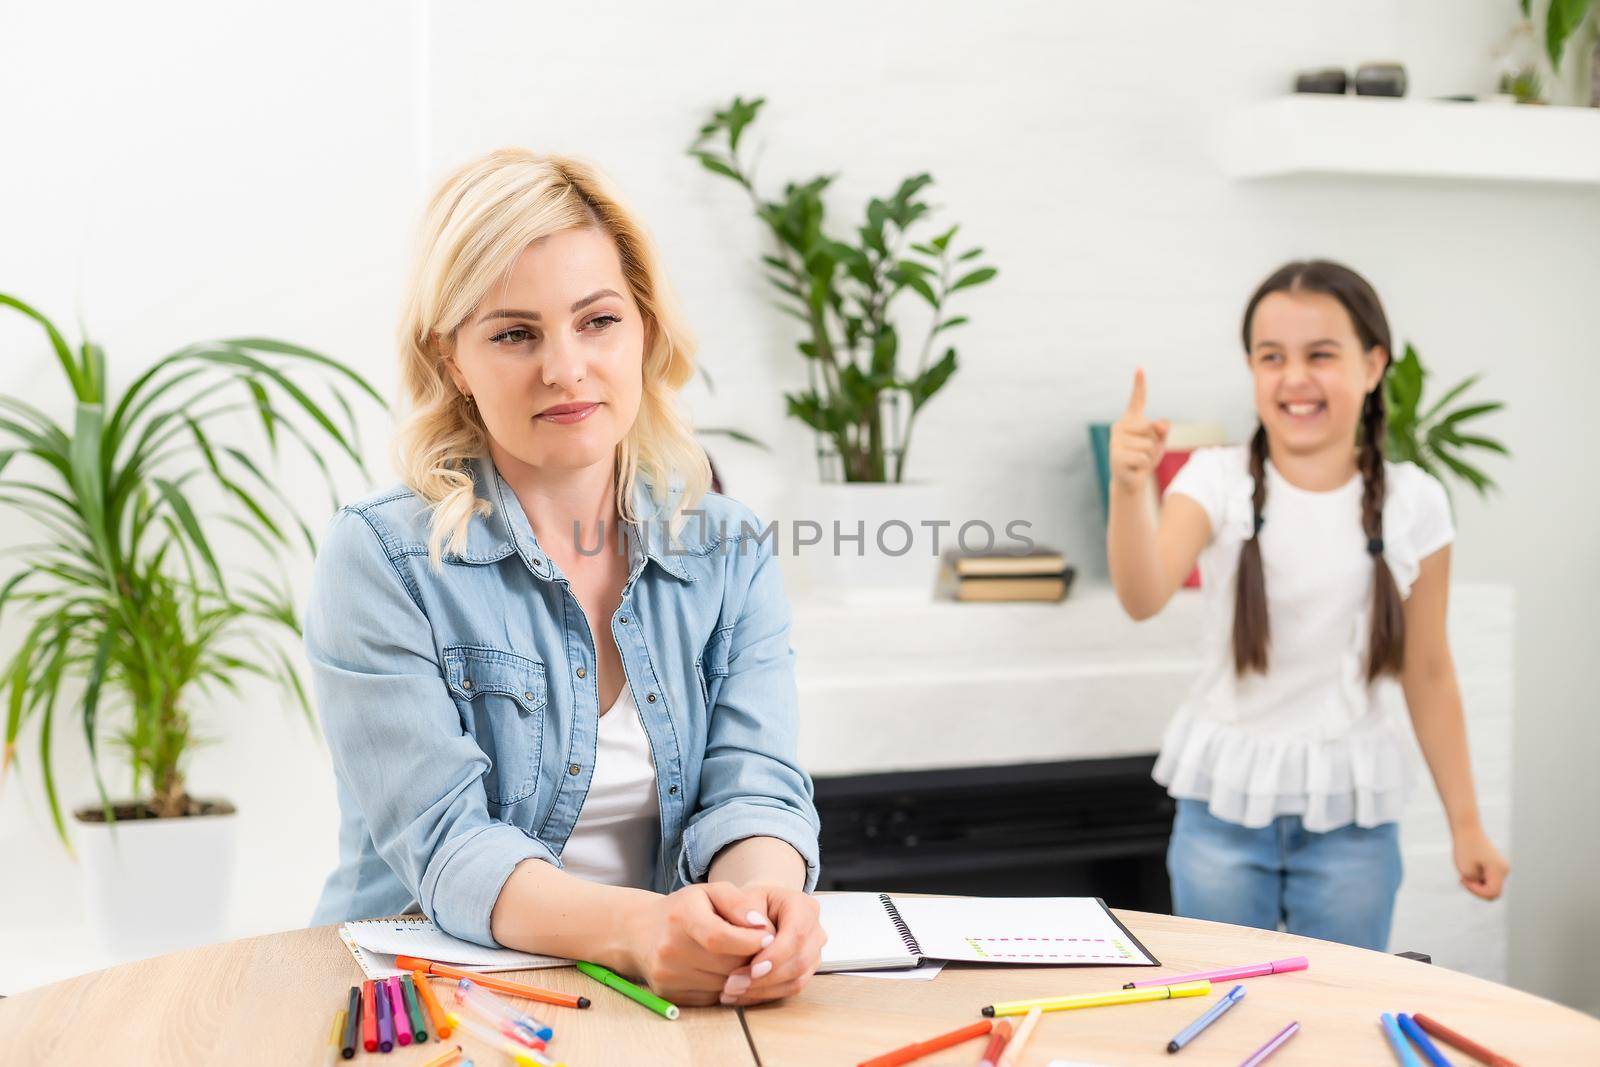 A mother helping her daughter with homework.